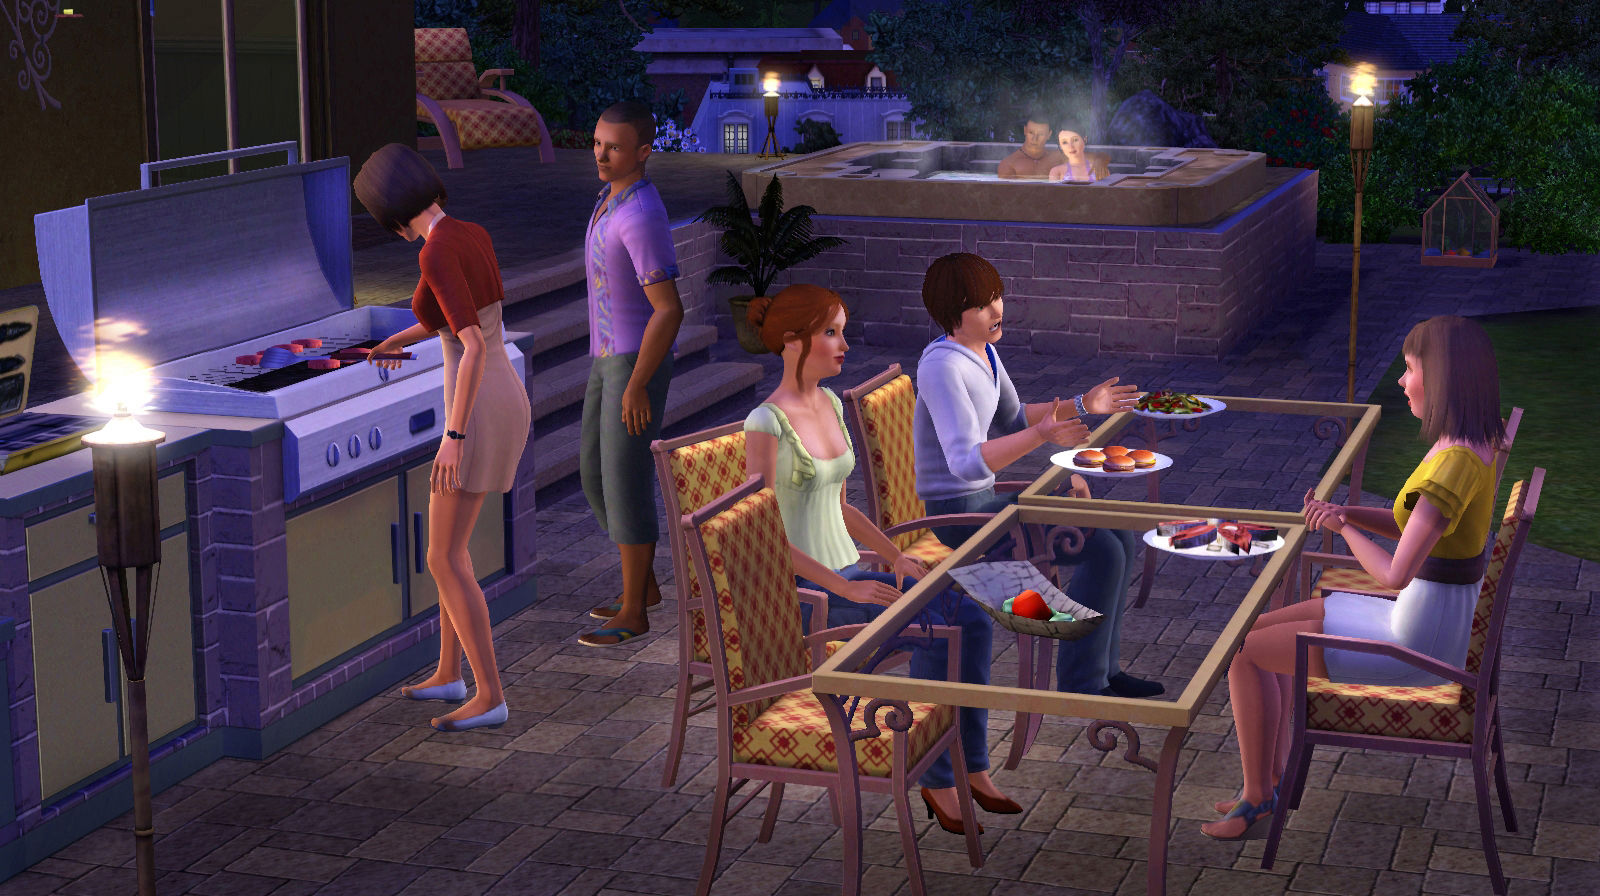 Sims 3 Outdoor Living Stuff Free Download